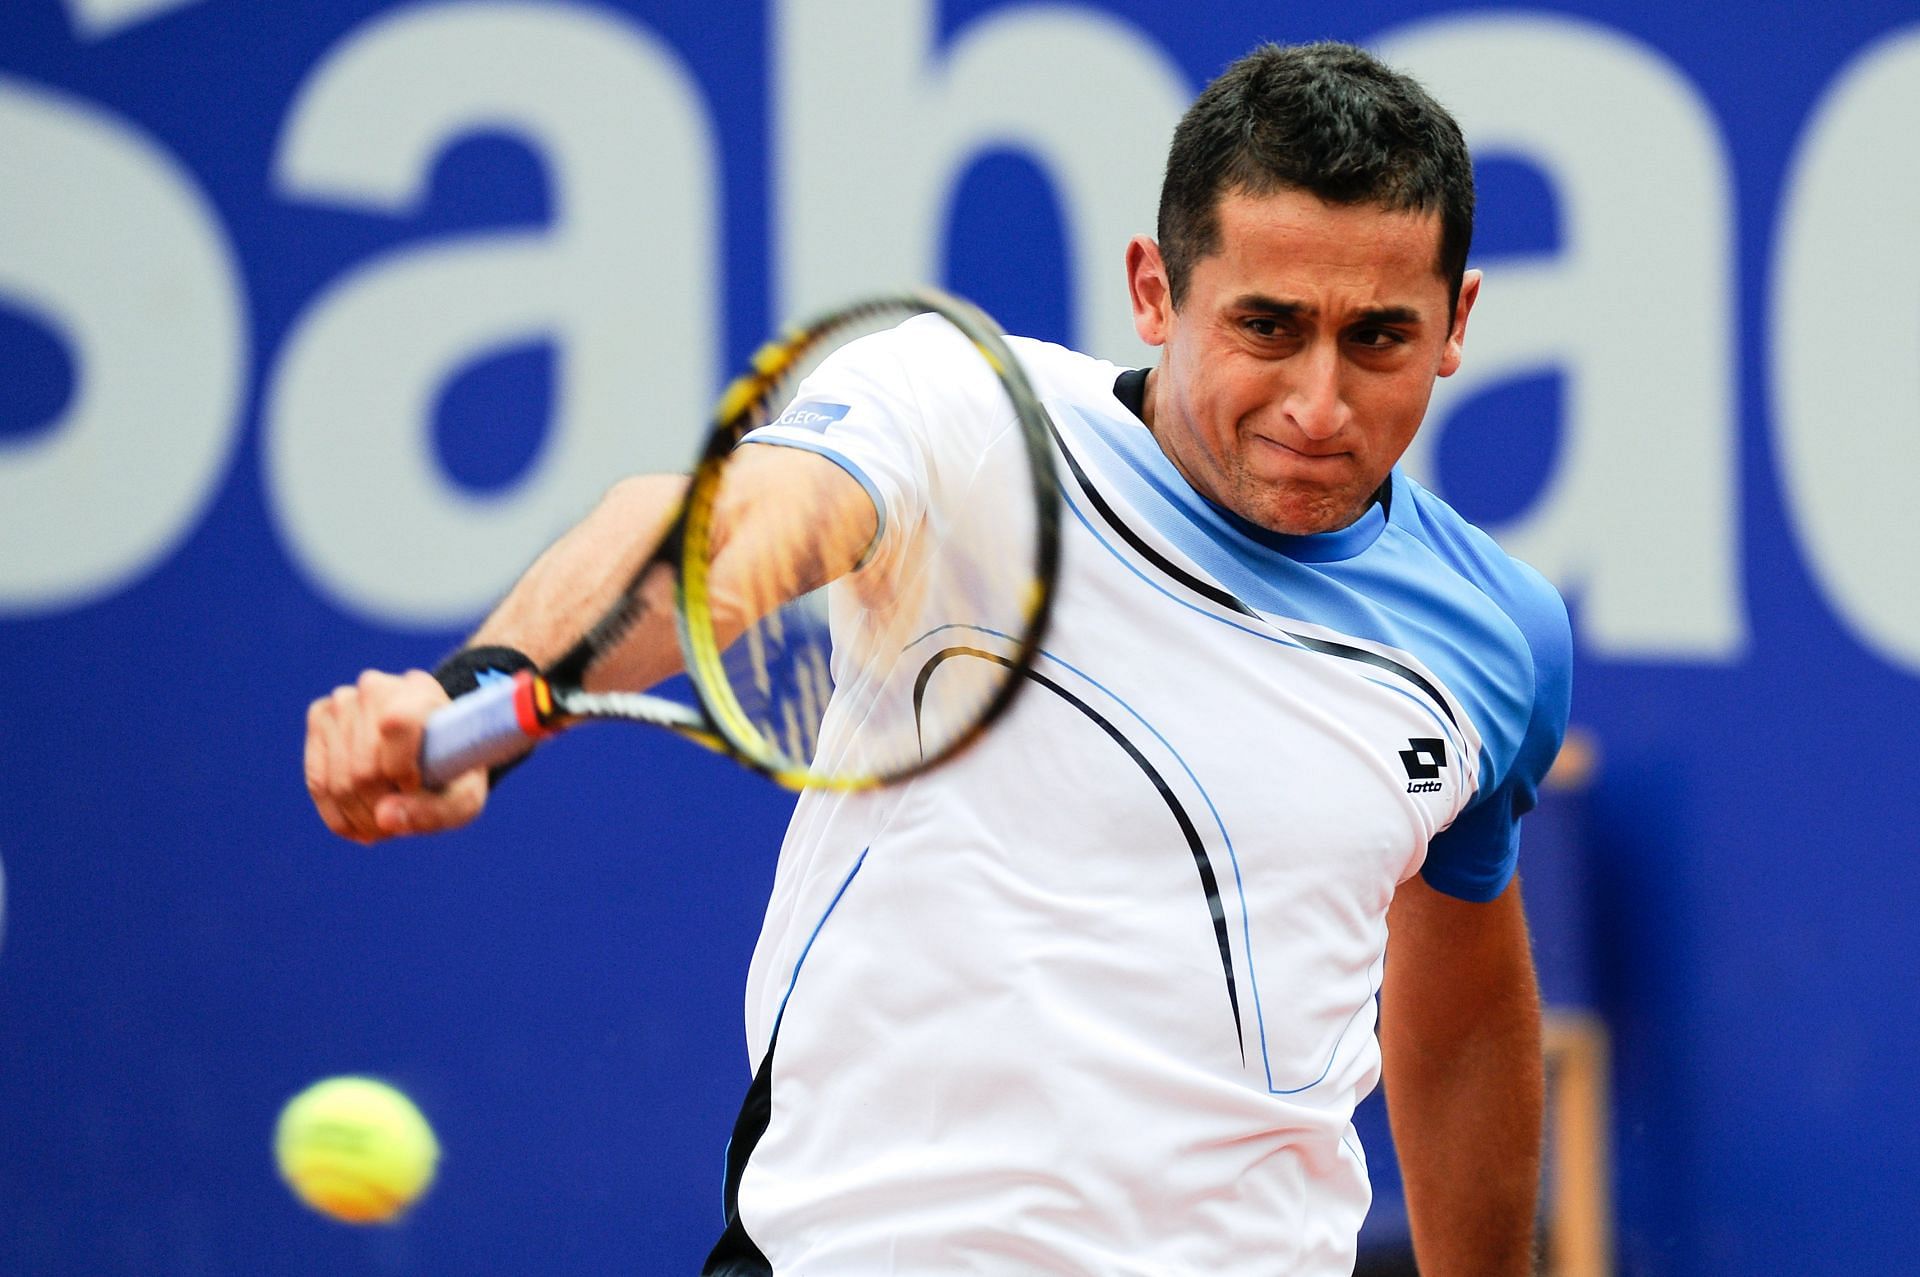 Nicolas Almagro in action at the 2013 Barcelona Open